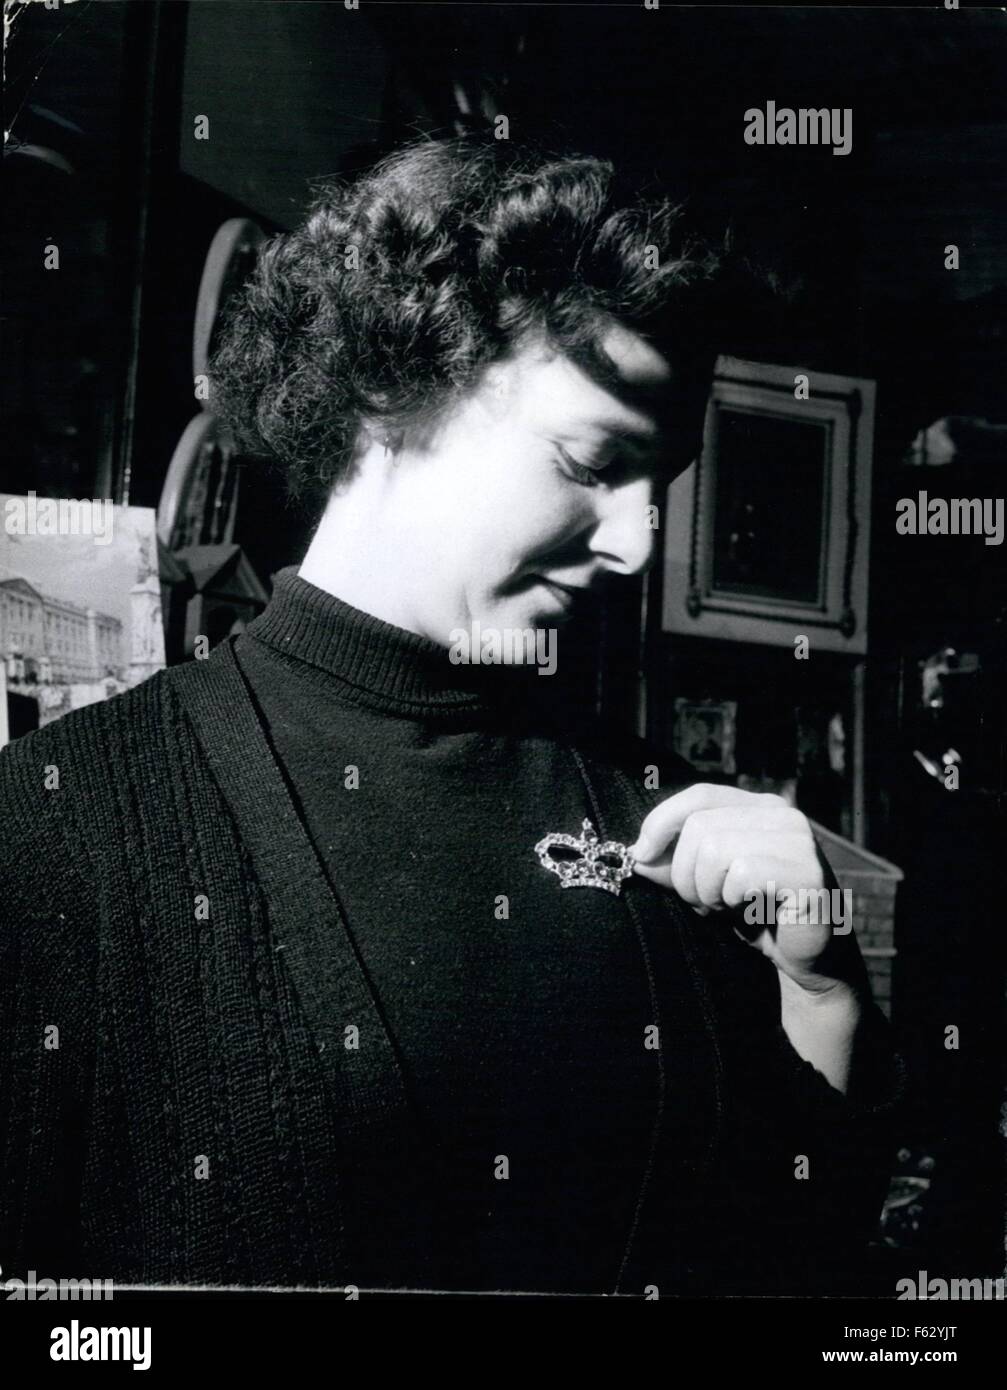 1968 - In a souvenir shop in Trafalgar Square, Miss Joyce Powell tries on a paste brooch in the shape of a Crown, one of the popular souvenirs for Coronation year. Coronation Souvenirs For Overseas Visitors: Just as soon as the date of the Coronation was announced manufacturers started to make souvenirs and now Gift and Souve air shops in London and other large cities are already doing a brisk trade, especially with overseas visitors, who, although they will not be in England for next year's Coronation, want to take souvenirs back home with them. At Ley and Ley, souvenir shop in Trafalgar Squa Stock Photo